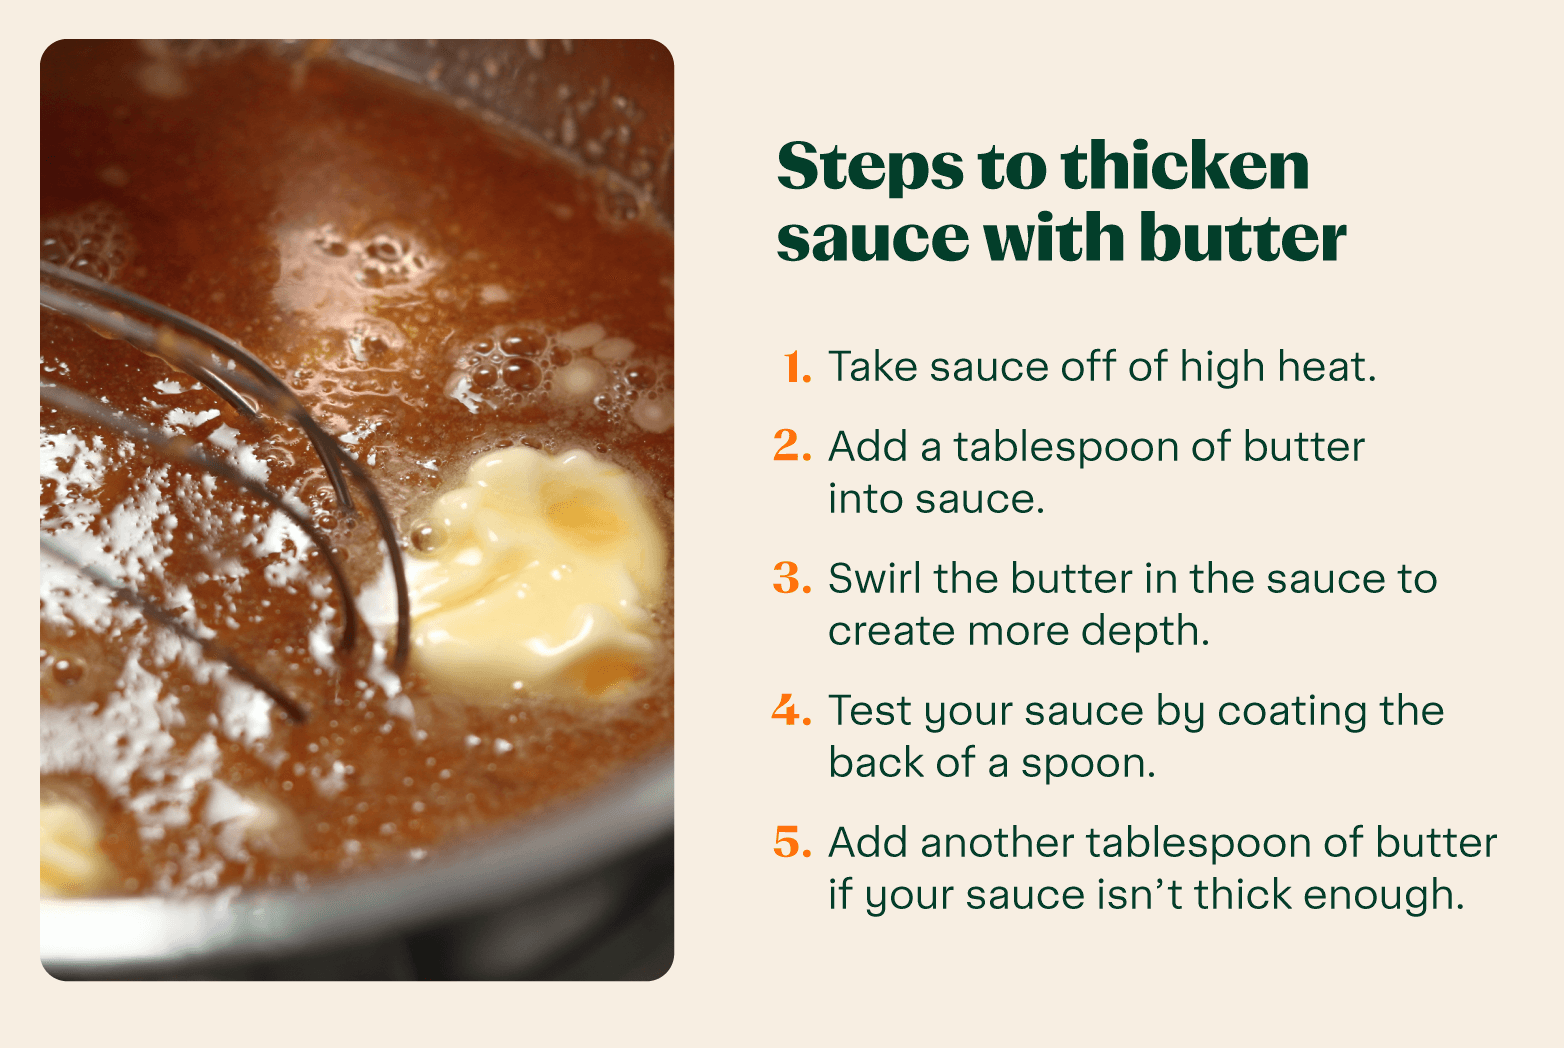 how to thicken sauce with butter